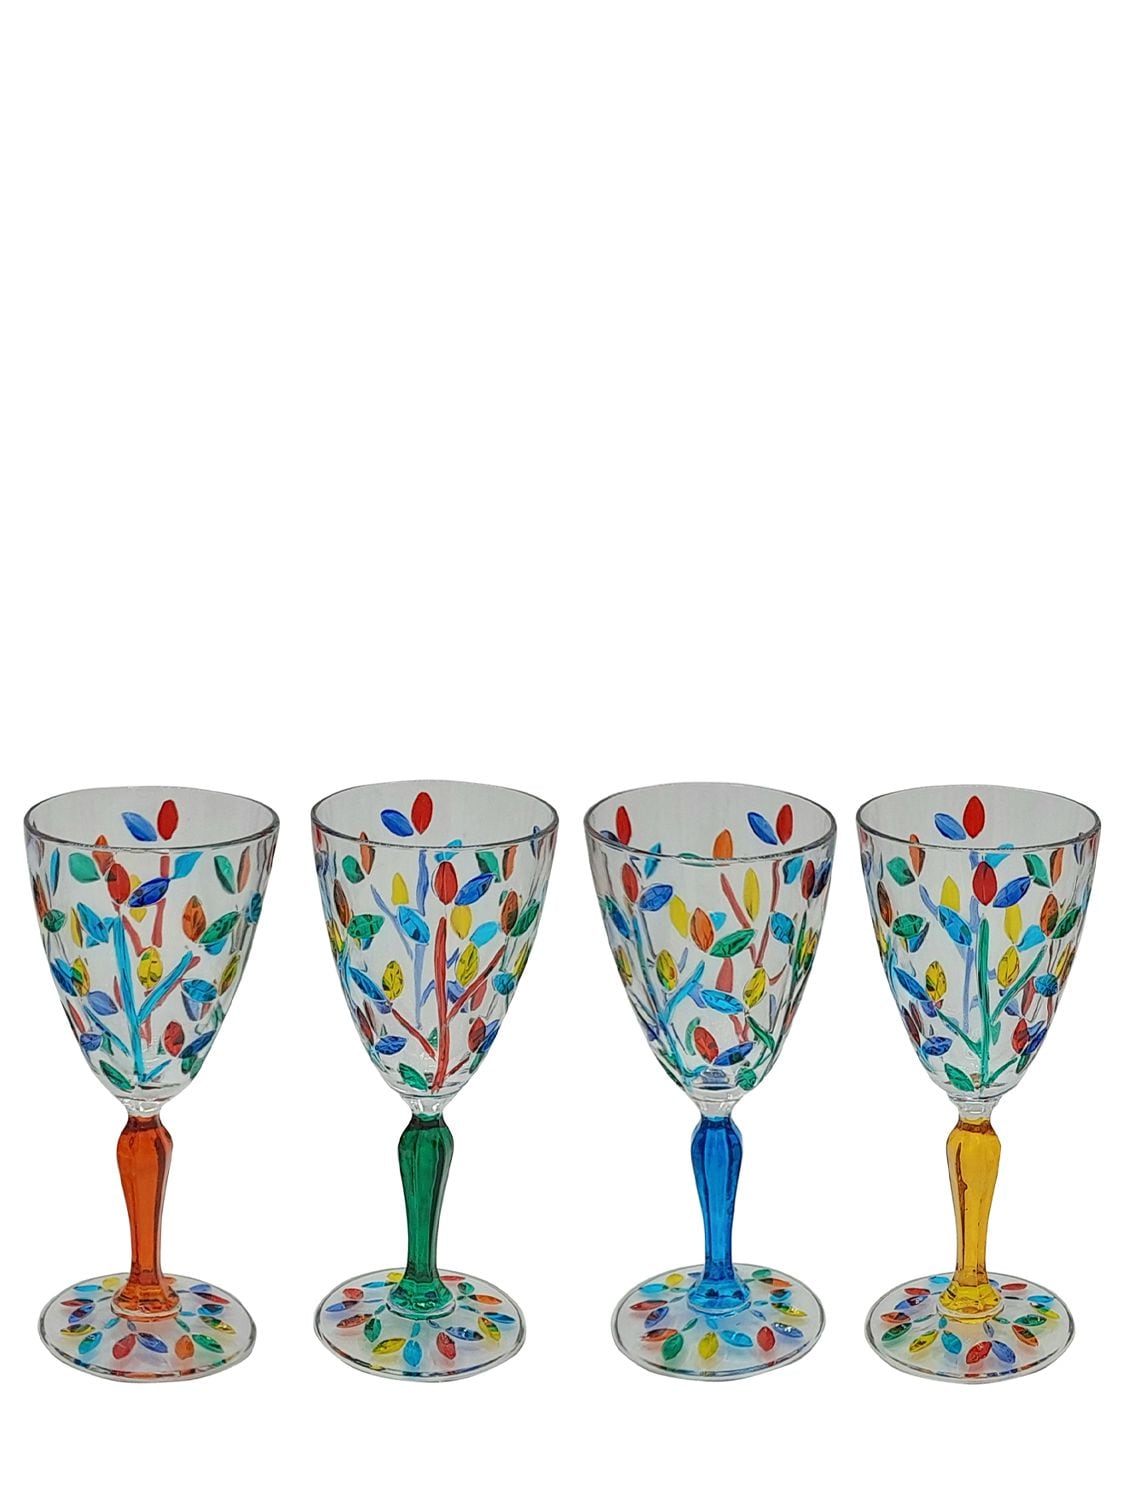 Les Ottomans Set Of 4 Crystal Wine Glasses In Multicolor